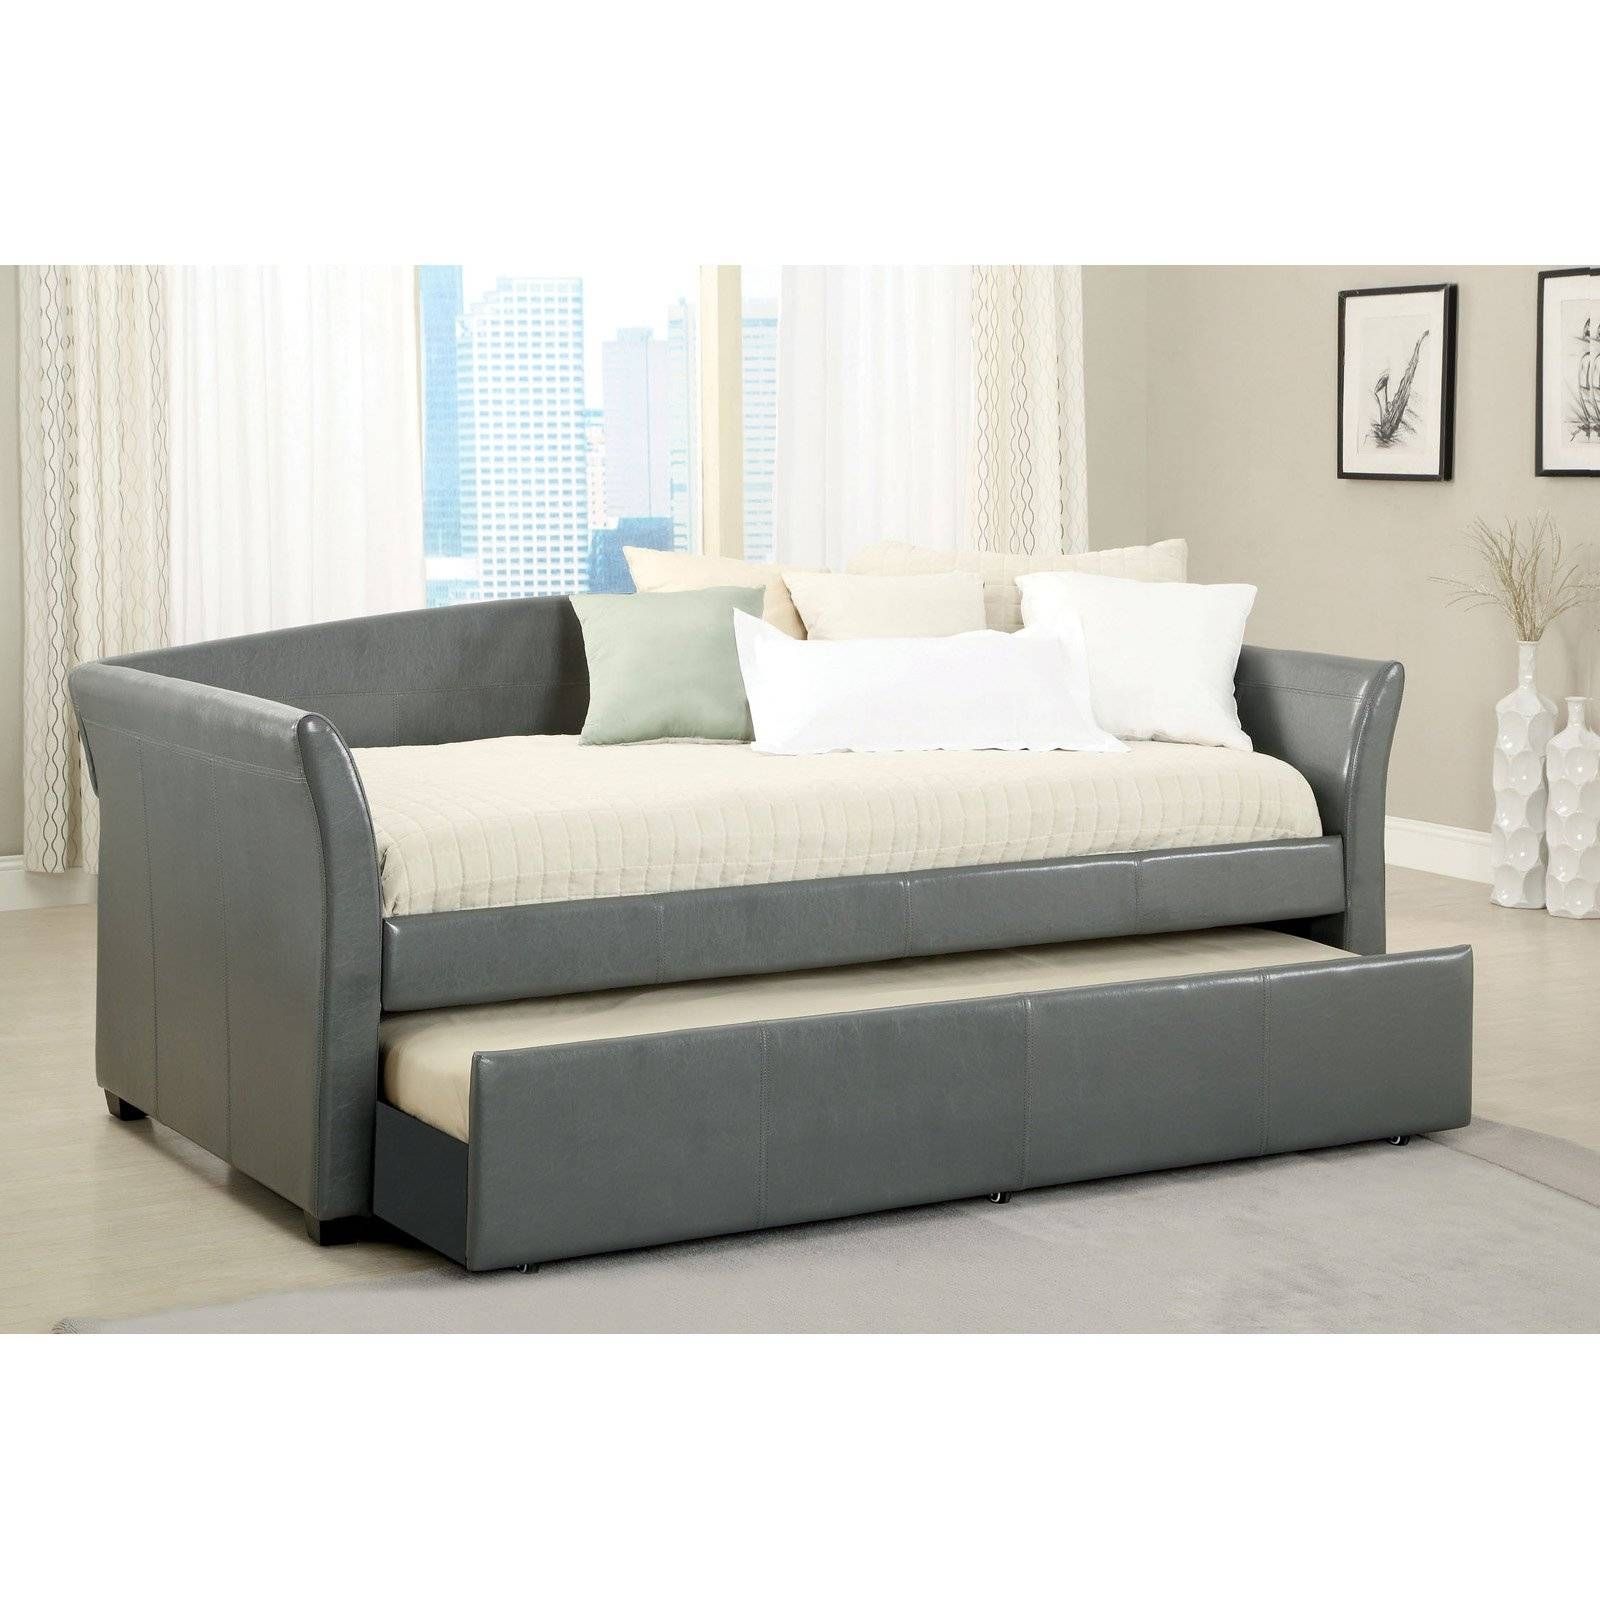 Sofa Daybed With Trundle | Best Sofas Ideas – Sofascouch Within Sofas With Trundle (View 5 of 15)